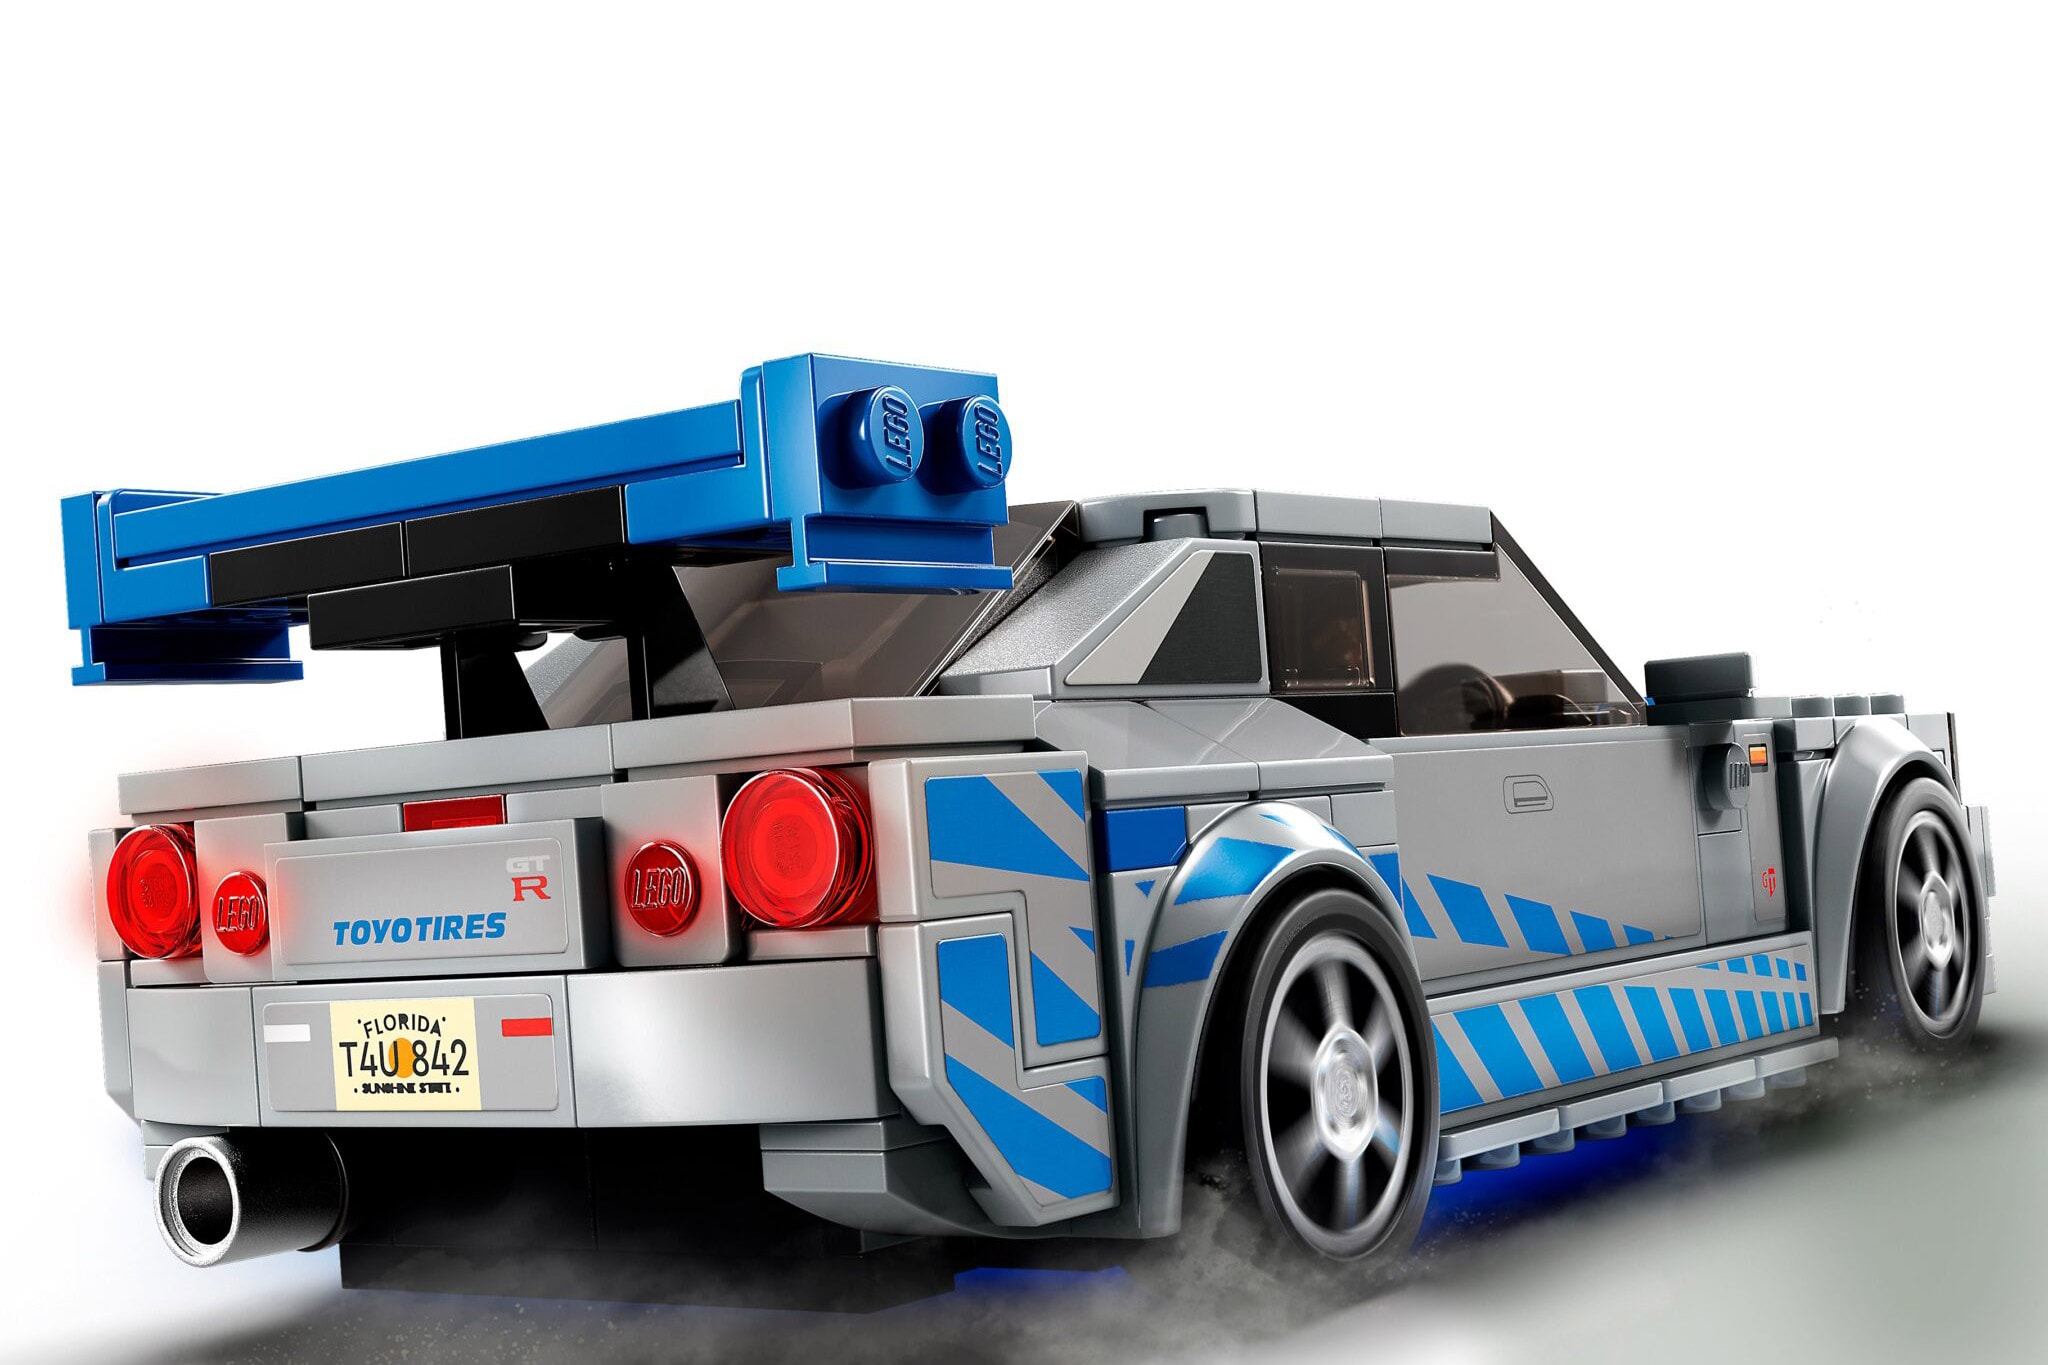 This New LEGO Set is Made for Fast and Furious Fans - The Car Guide